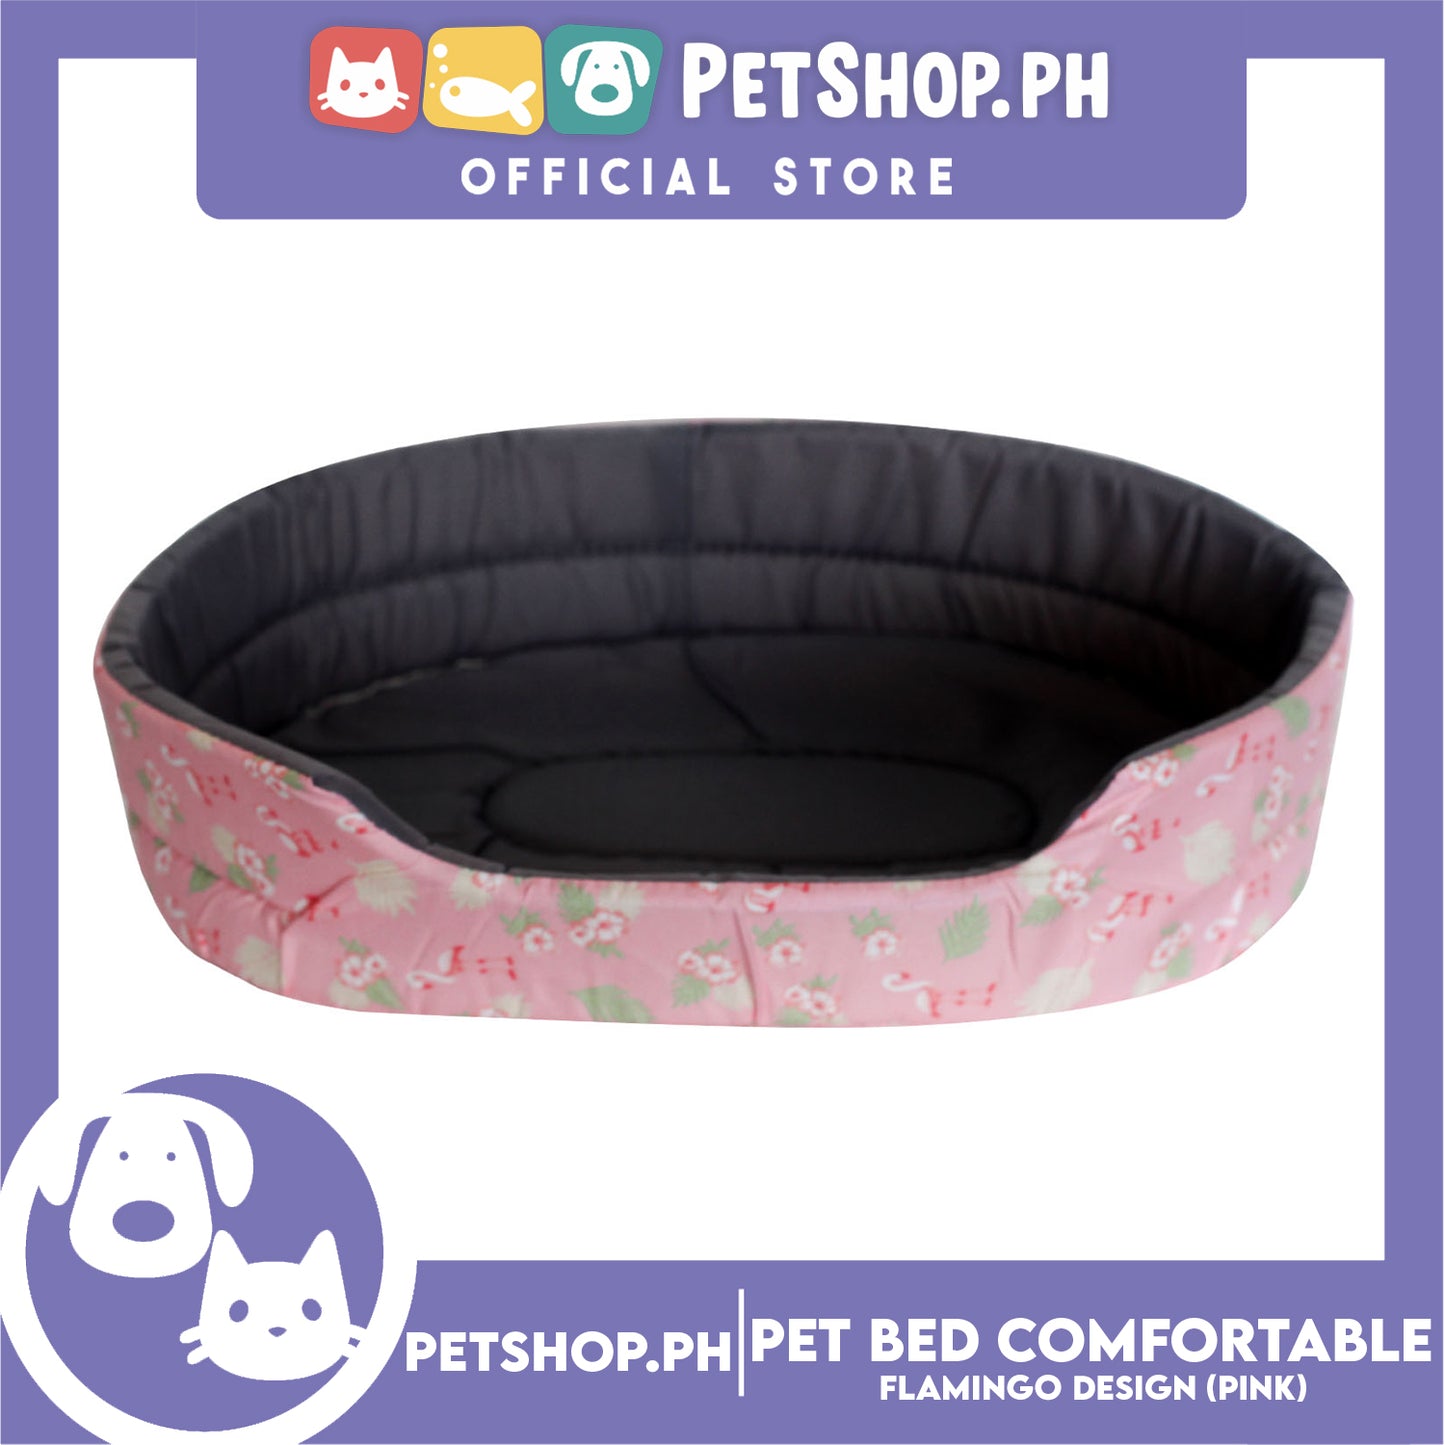 Pet Bed Comfortable Sleeping Bed with Flamingo Design 38x29x10cm for Dogs & Cats Pink